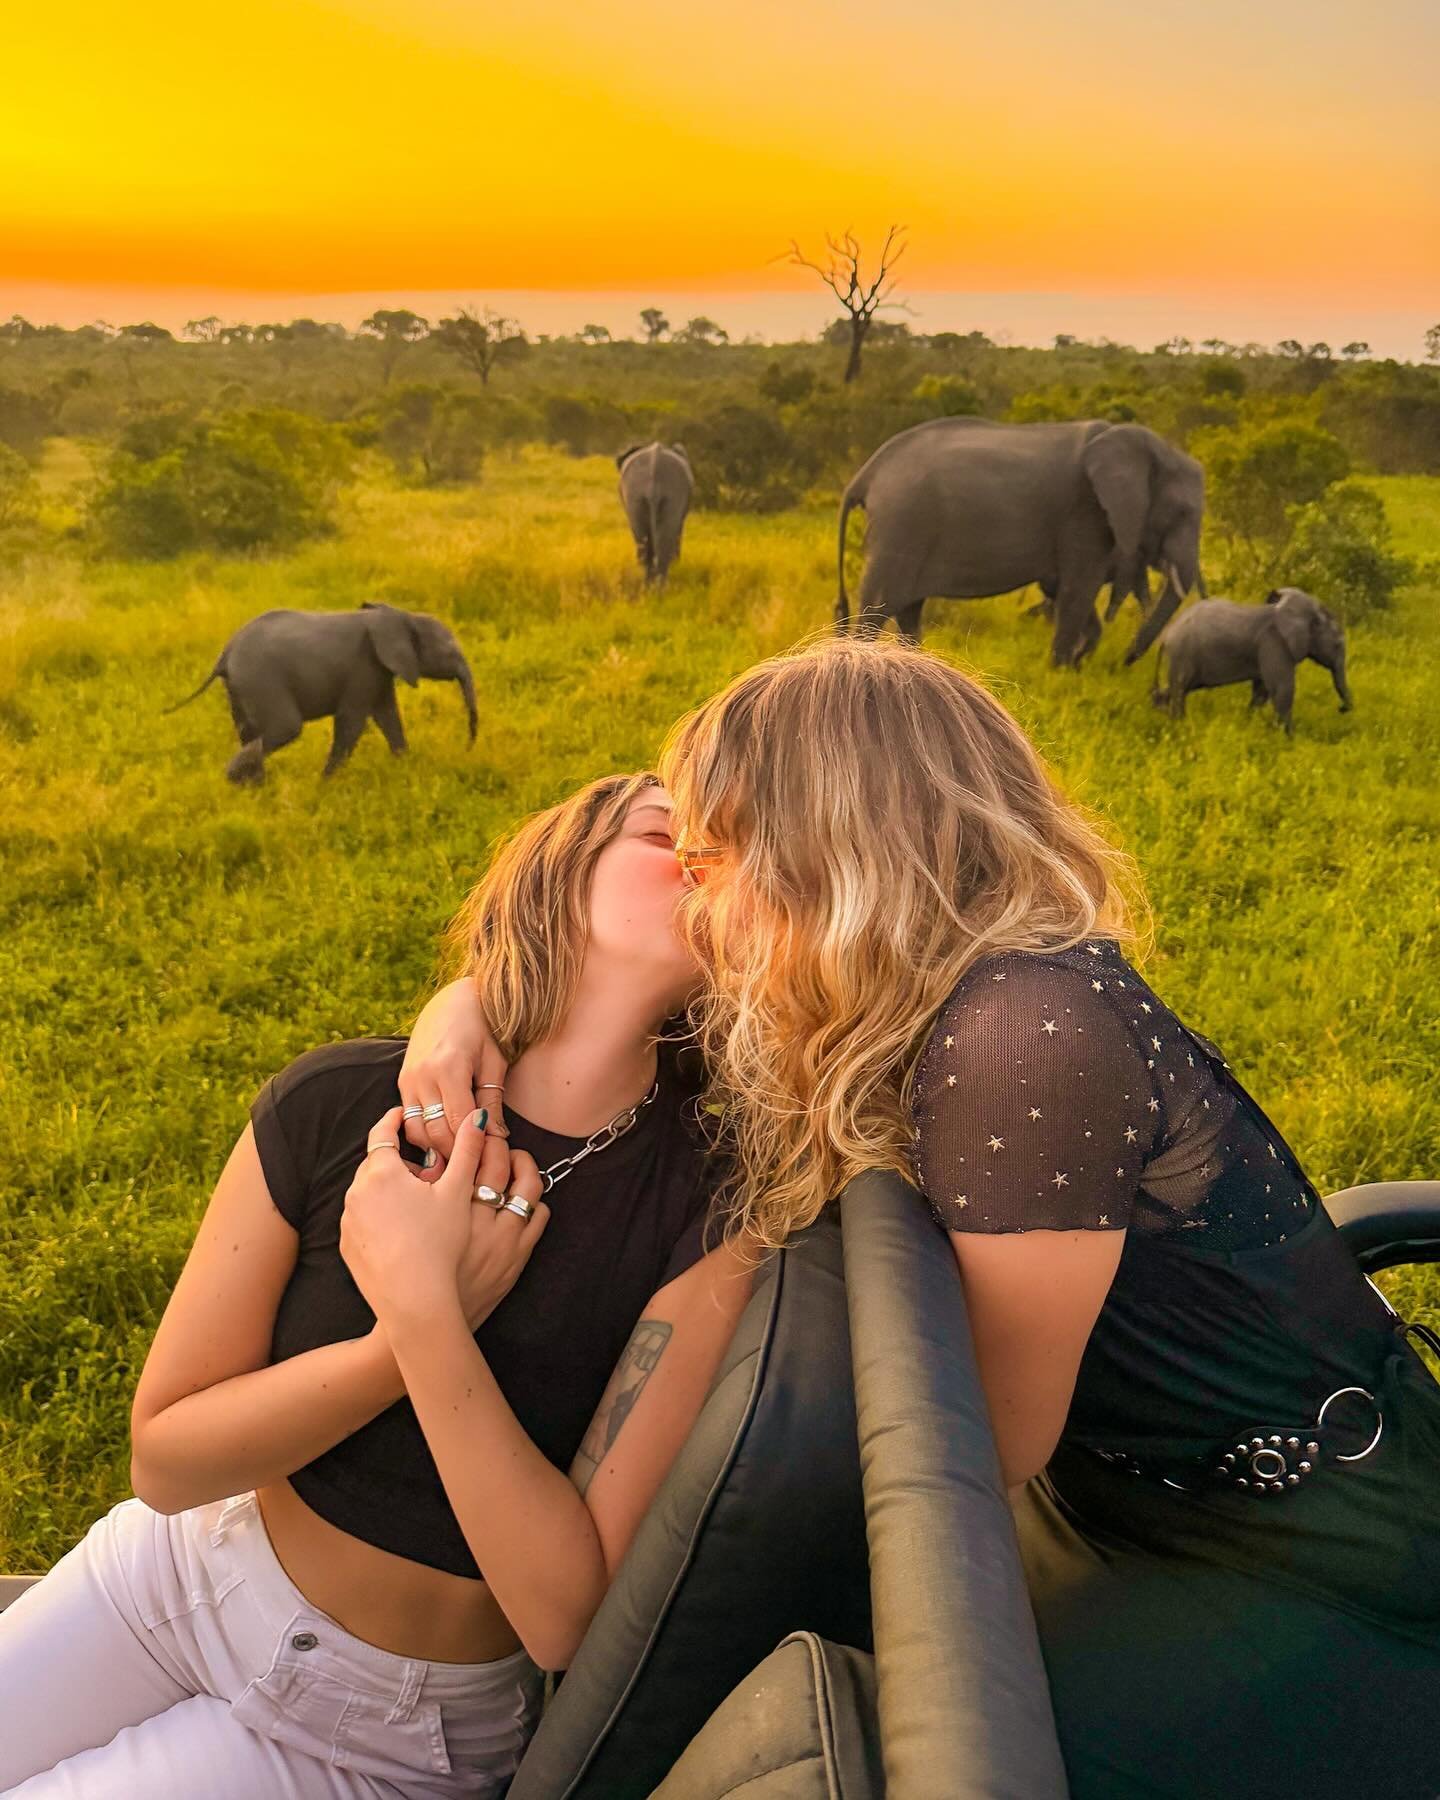 when people ask if we&rsquo;re rich, we&rsquo;re just gonna say &lsquo;yes&rsquo; from now on because we are definitely rich in memories 🥹

Elephants are known for having an amazing memory, so we&rsquo;re channeling our inner elephant memories to re